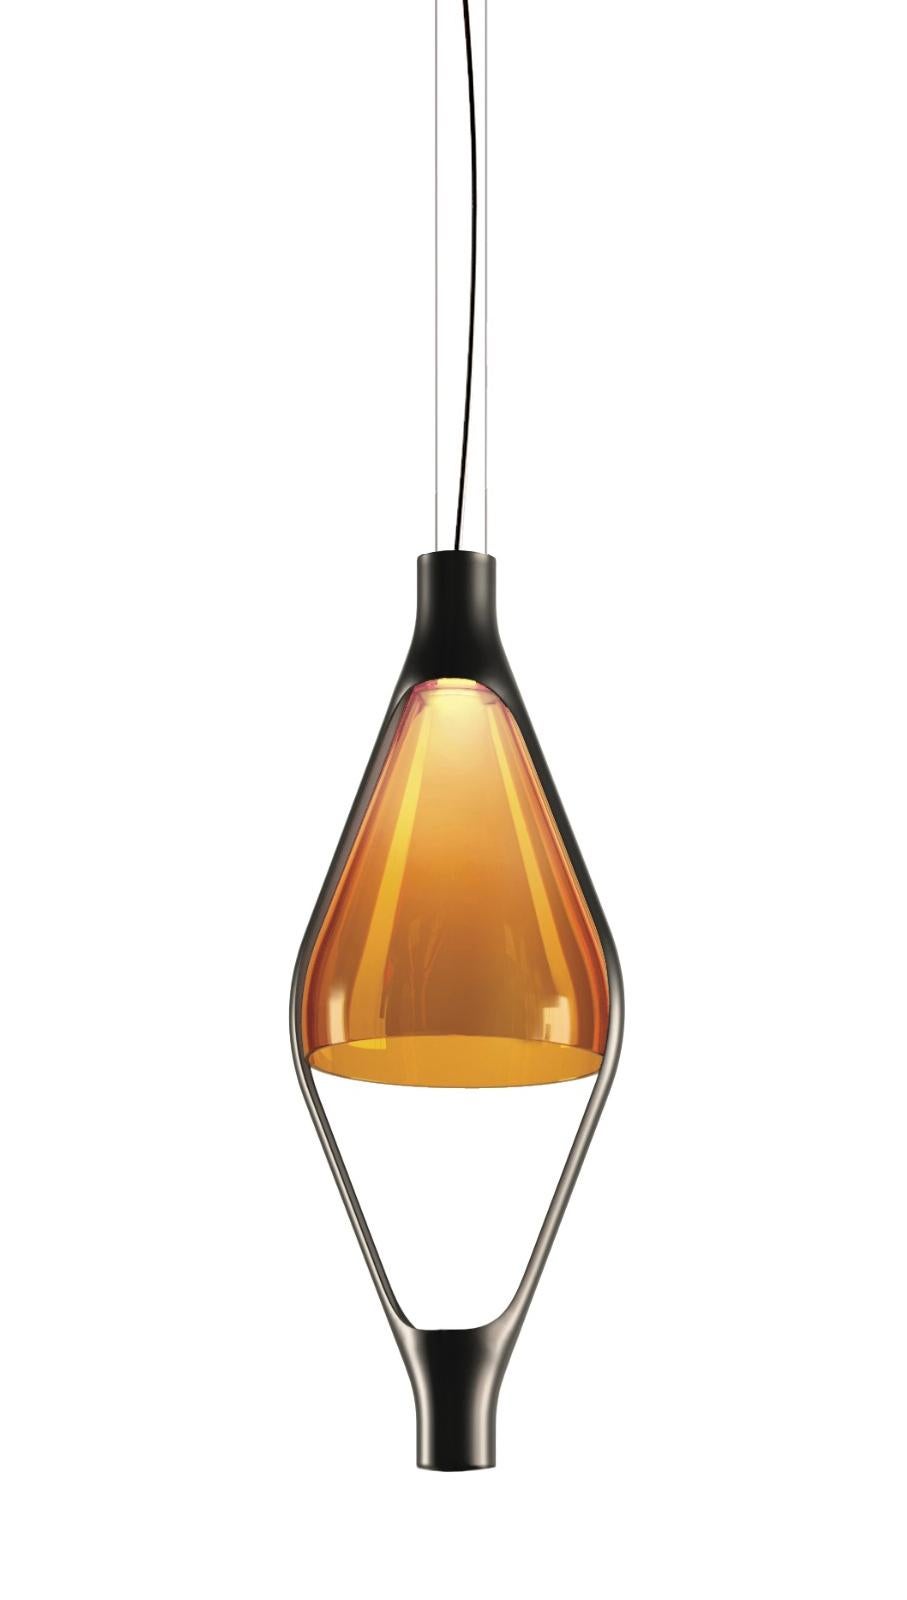 'Viceversa' Modular Suspension Lamp by Noé Lawrance for Kdln in Smoke Grey For Sale 3